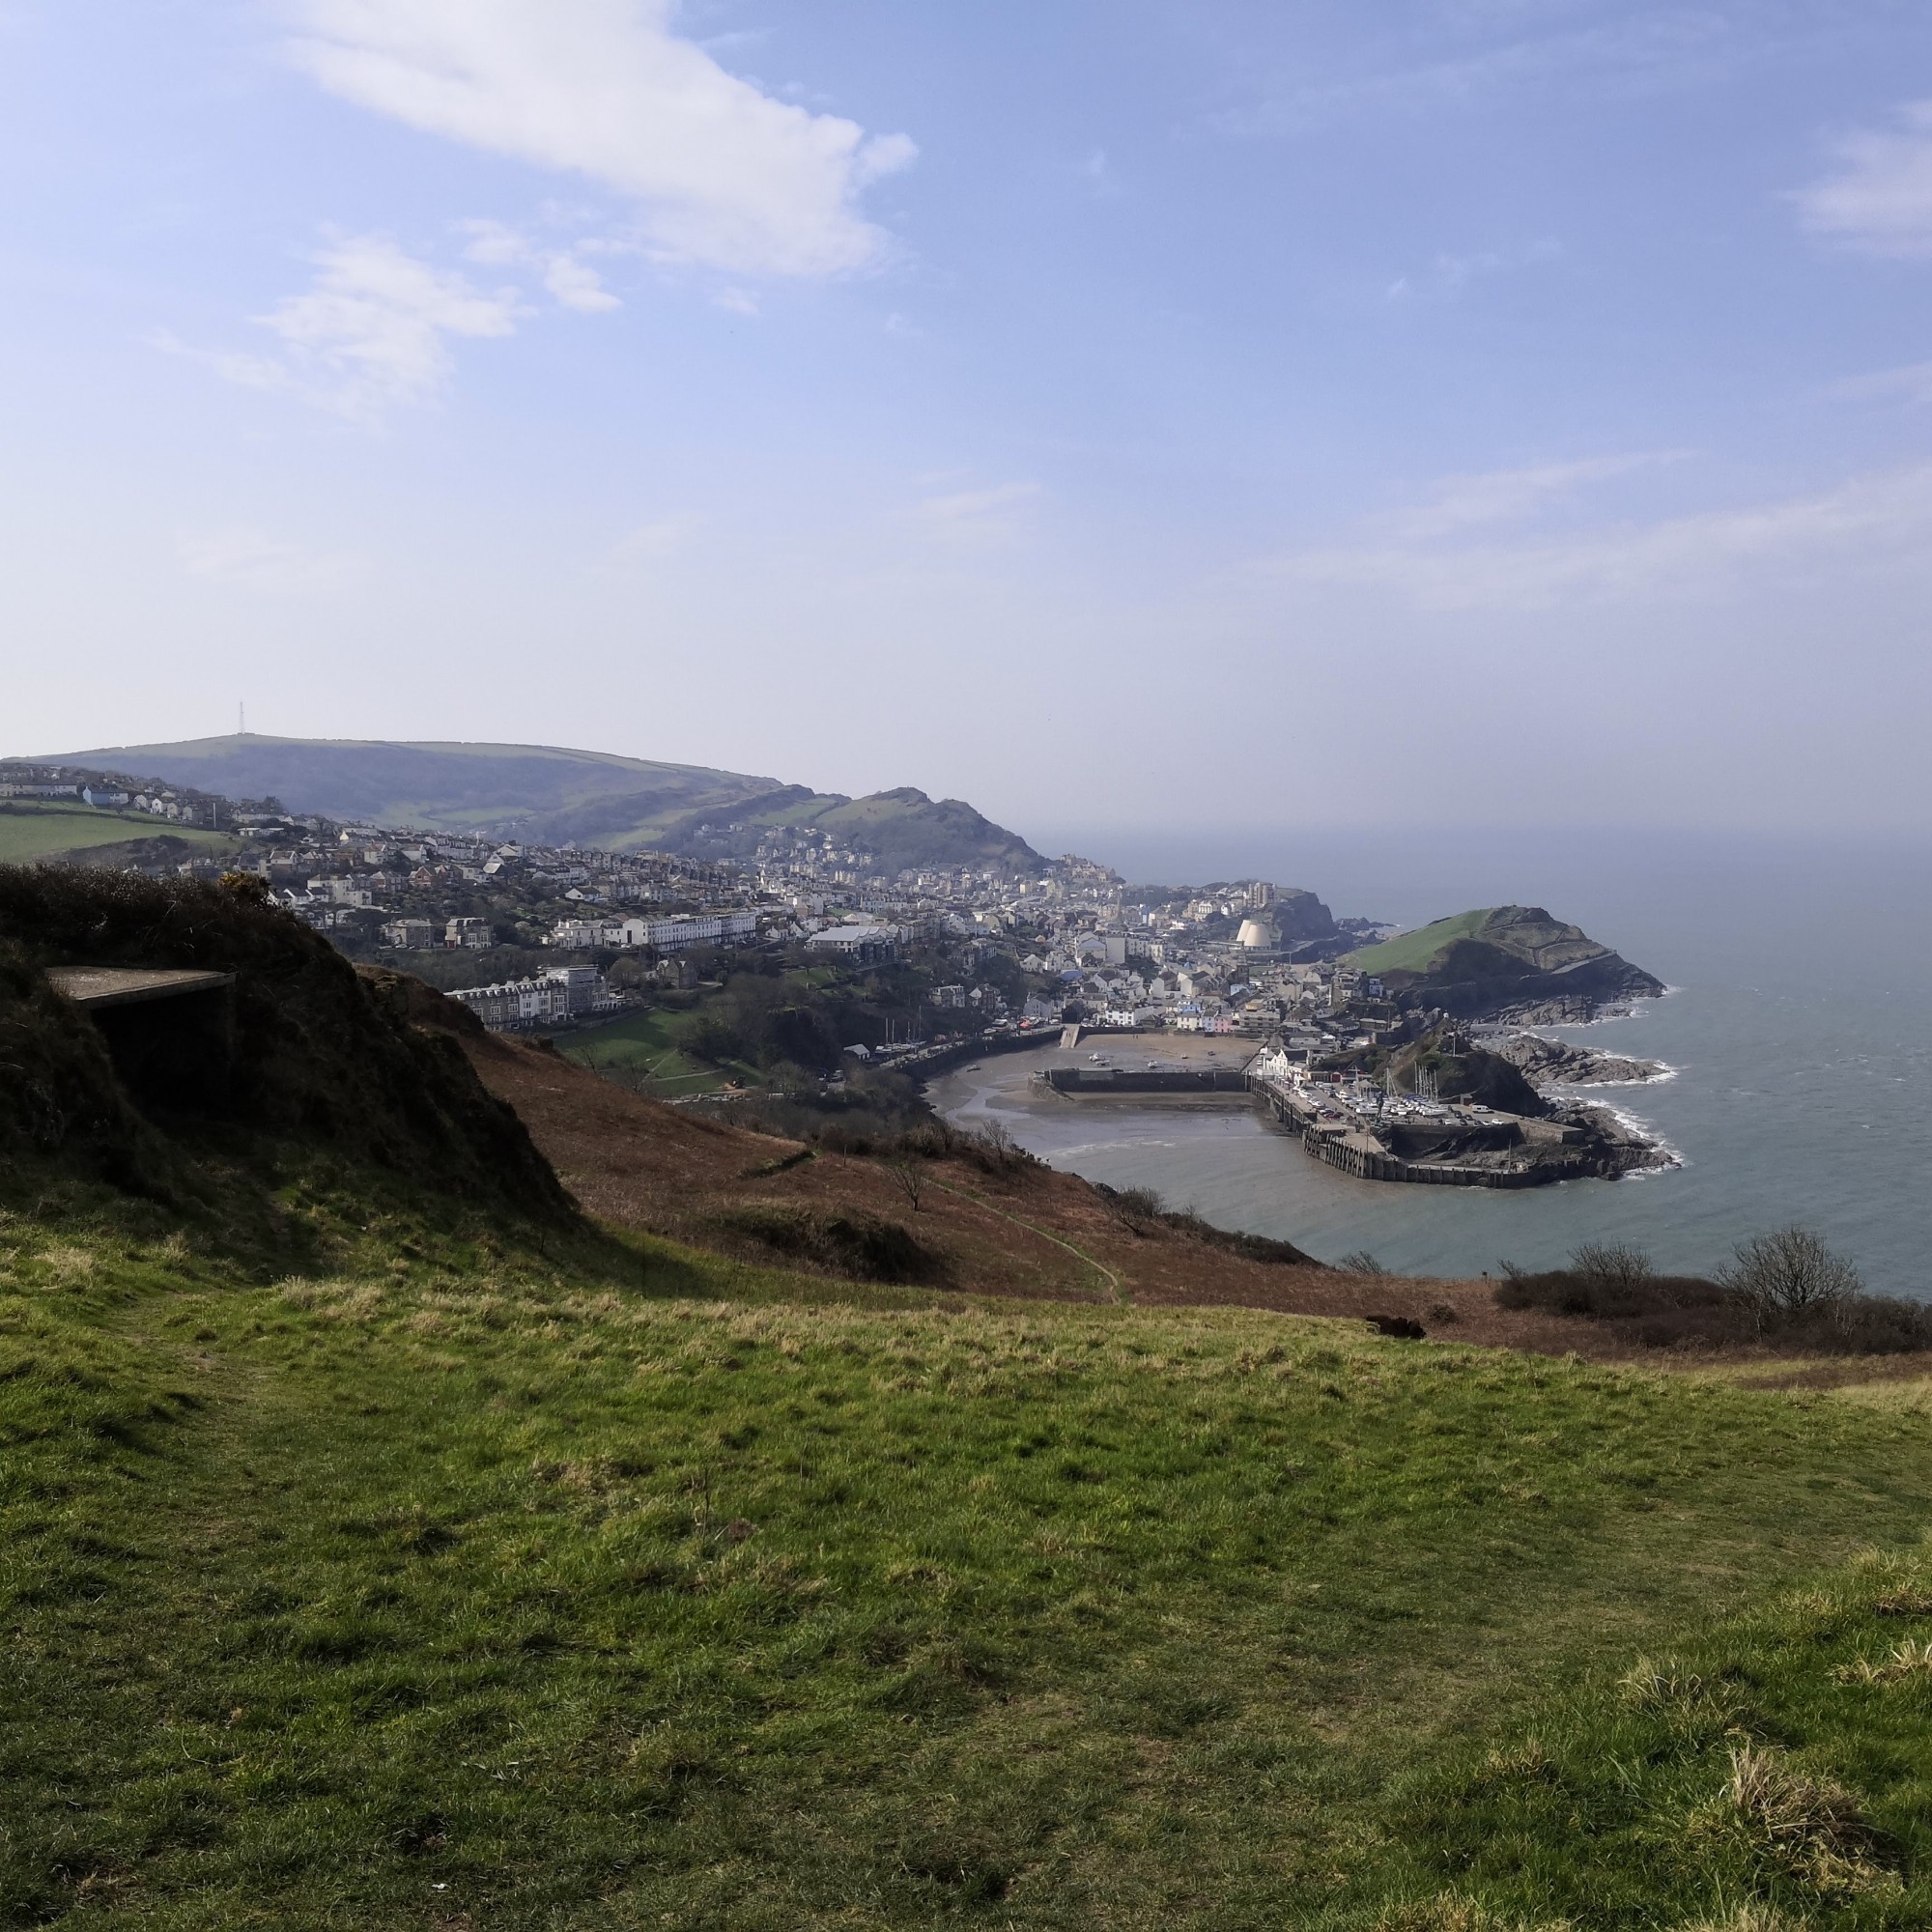 A bird's-eye view of Ilfracombe